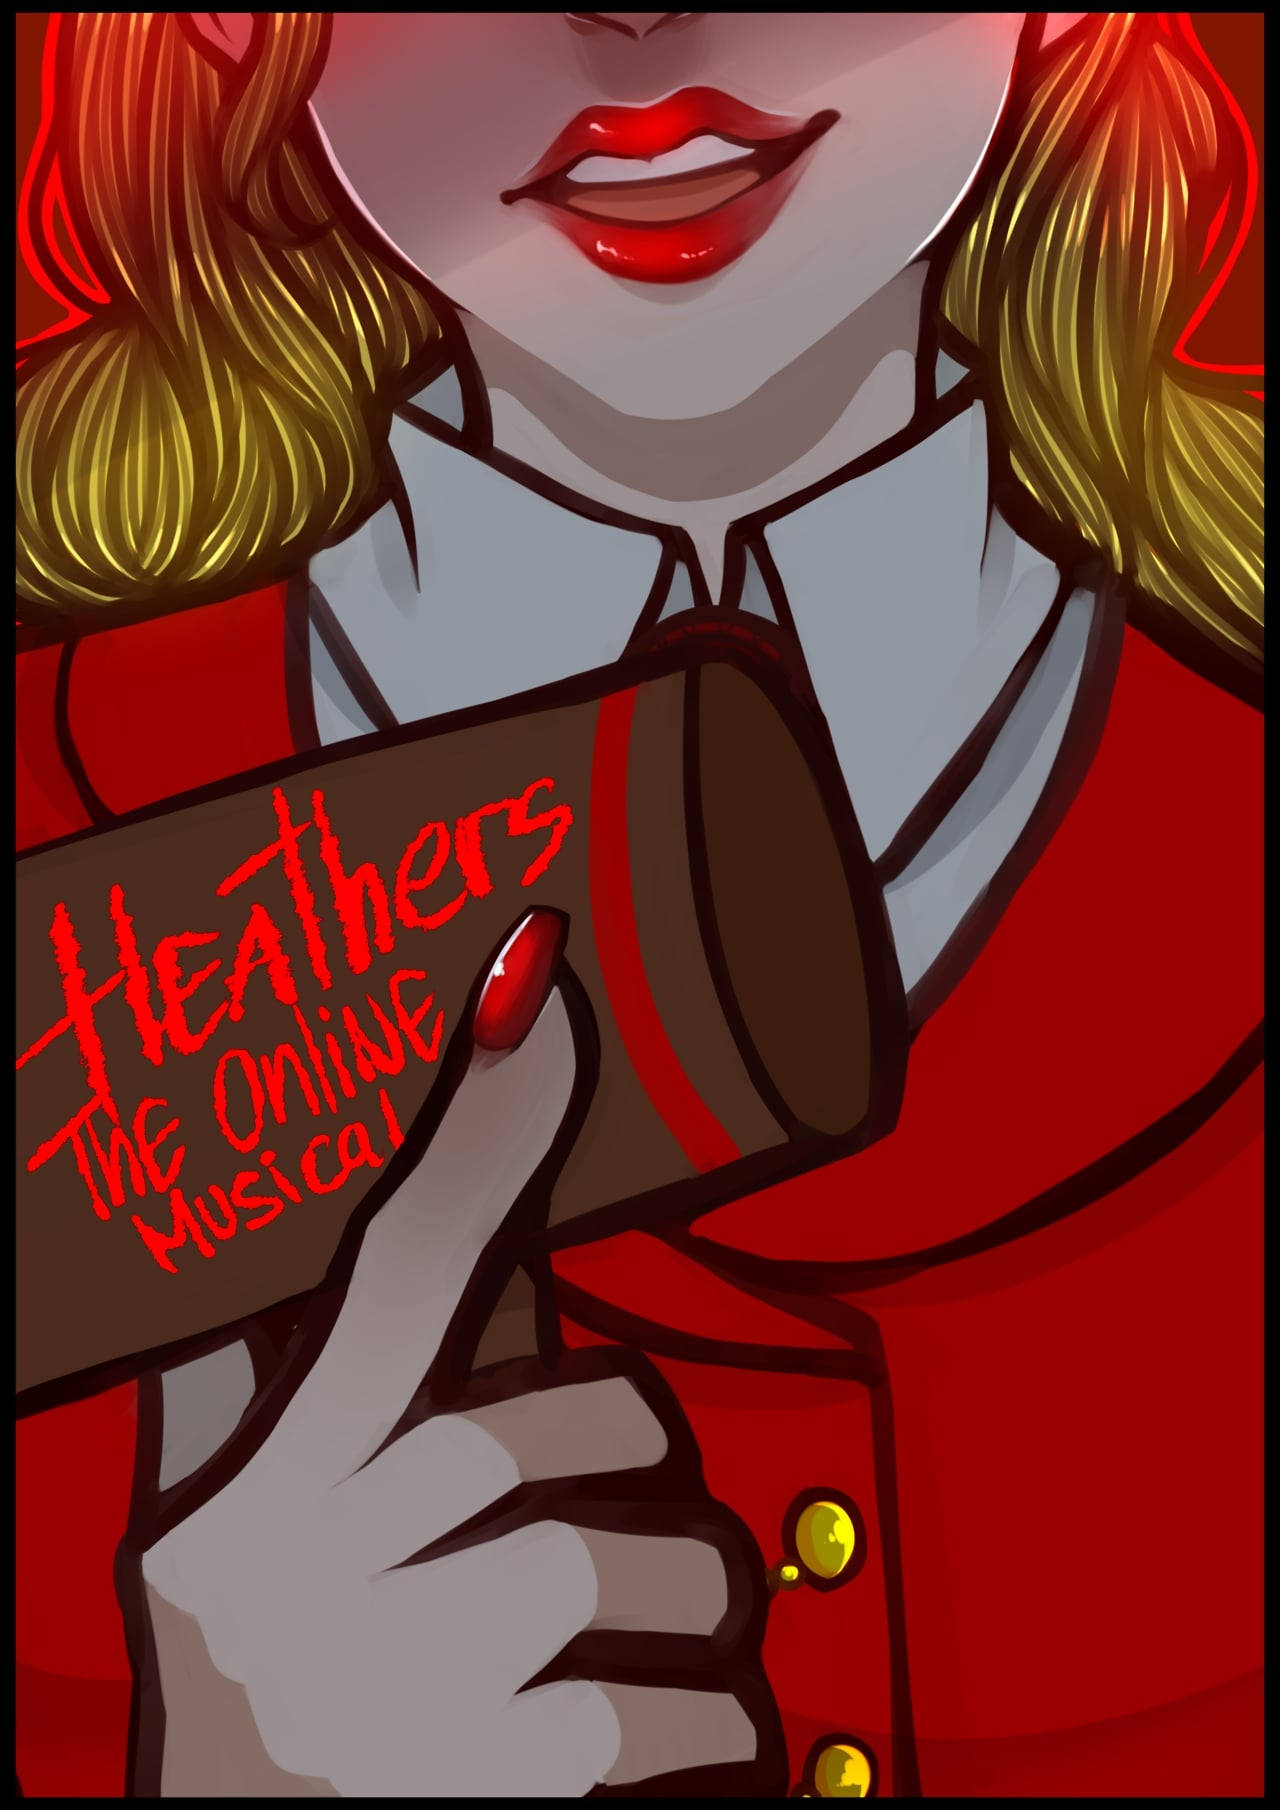 Heathers Online Musical Poster Wallpaper